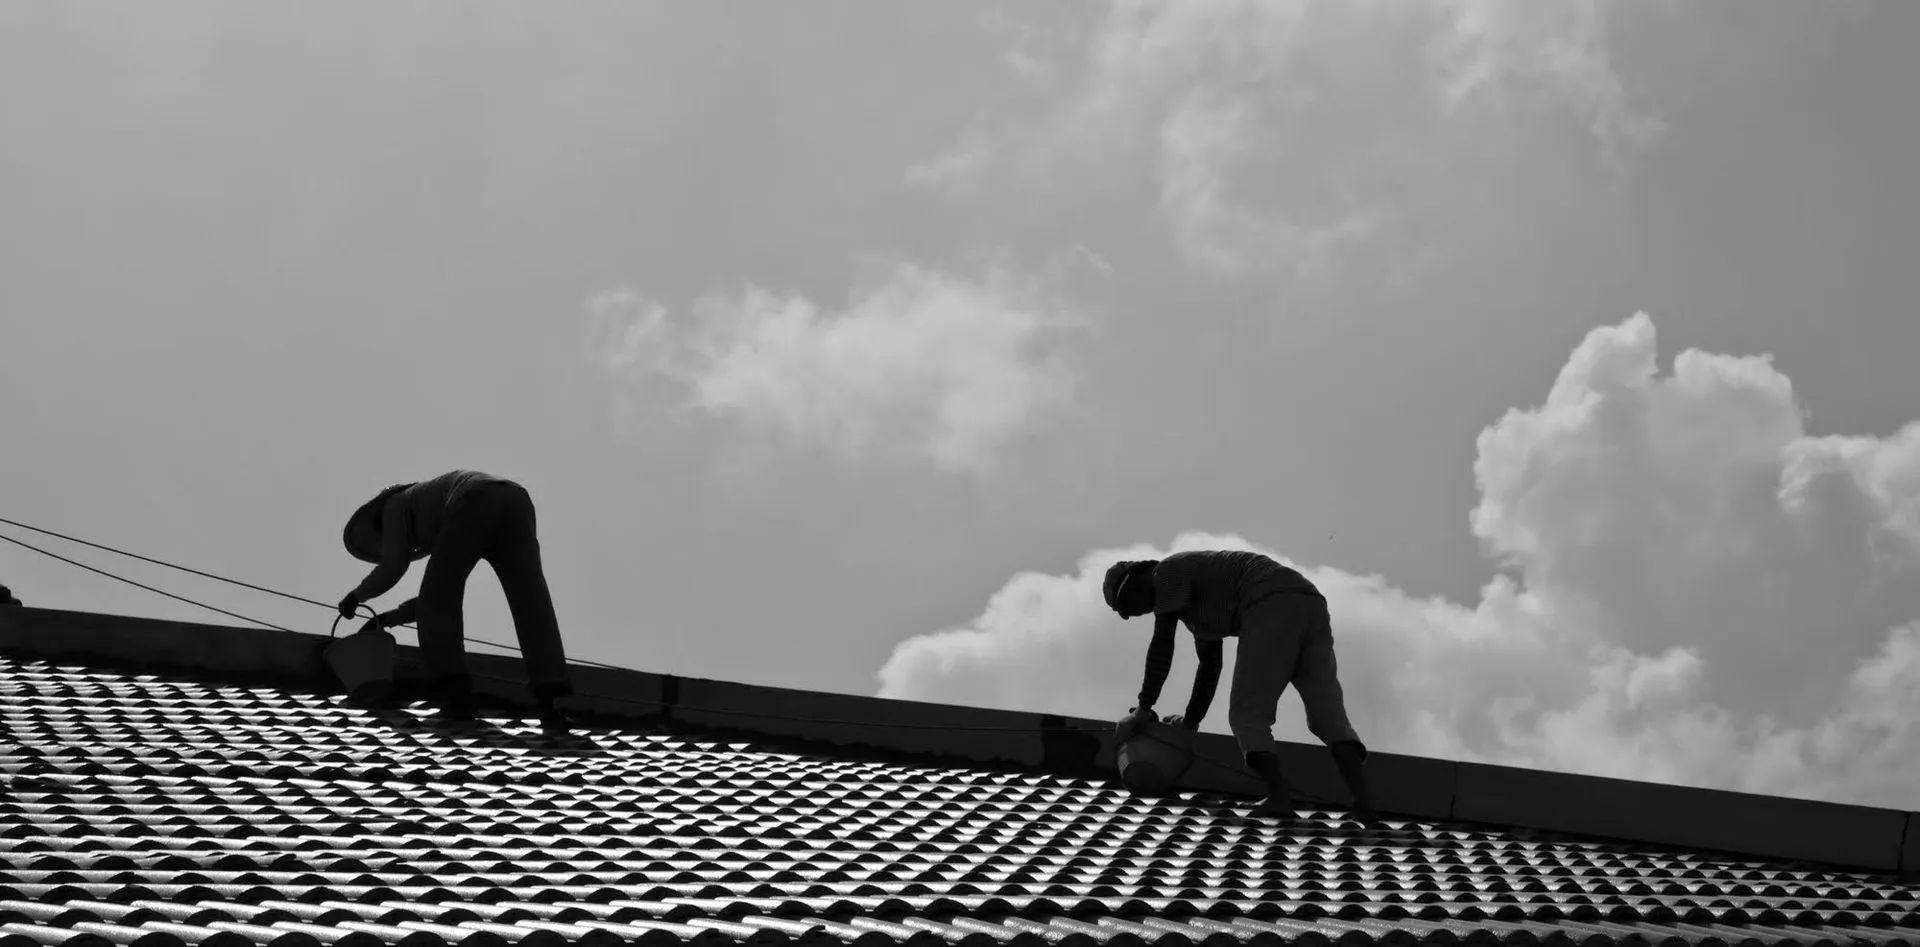 Factors To Consider for the Best Roofing Material